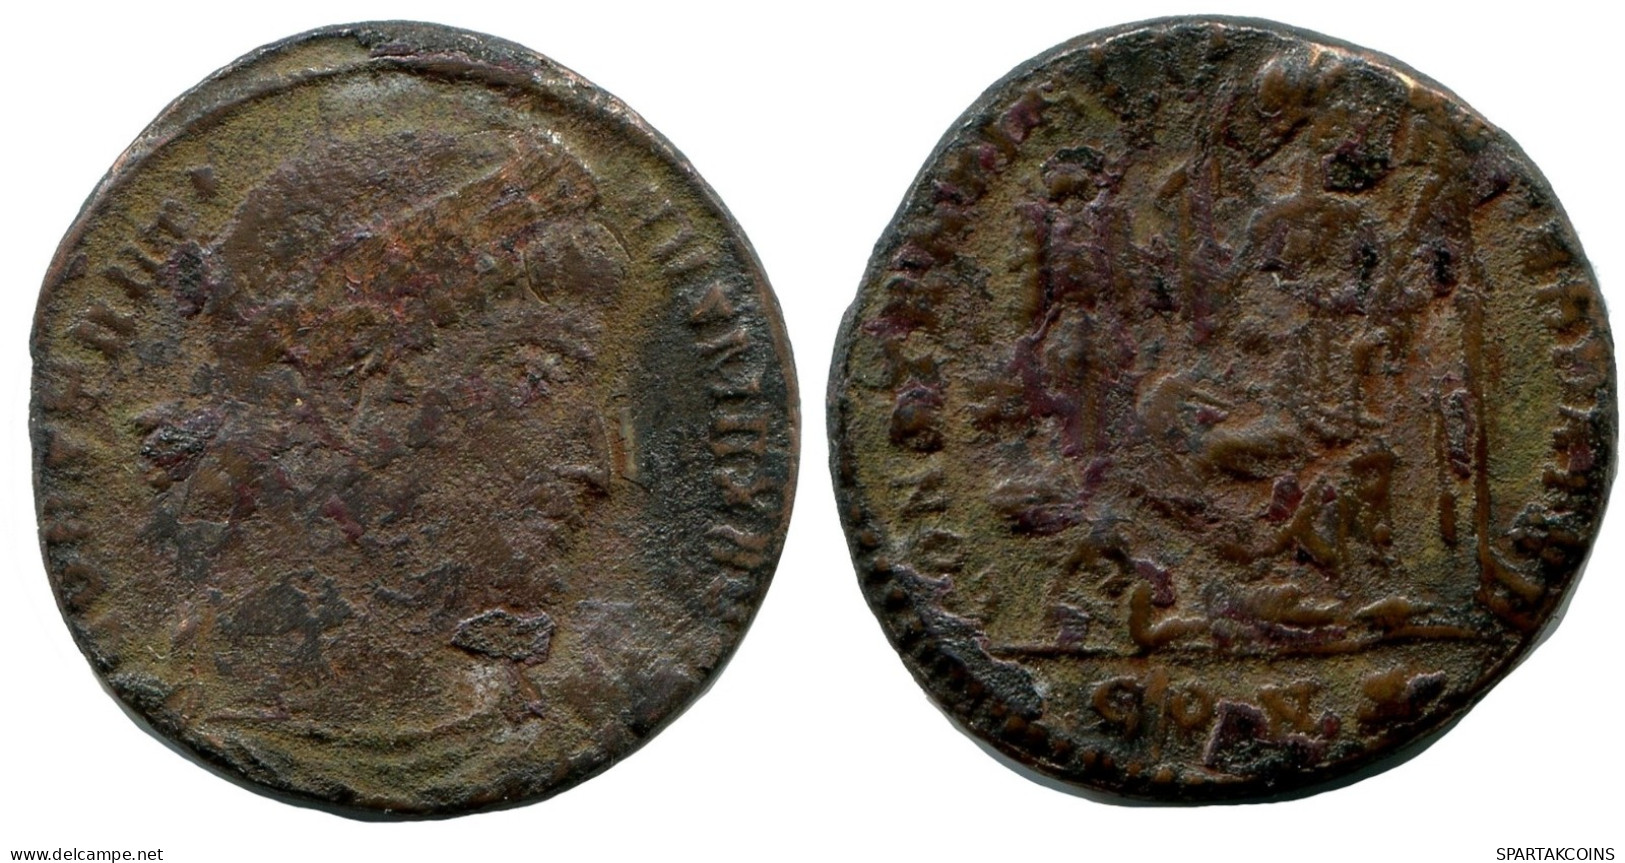 CONSTANTINE I MINTED IN CONSTANTINOPLE FOUND IN IHNASYAH HOARD #ANC10816.14.D.A - L'Empire Chrétien (307 à 363)